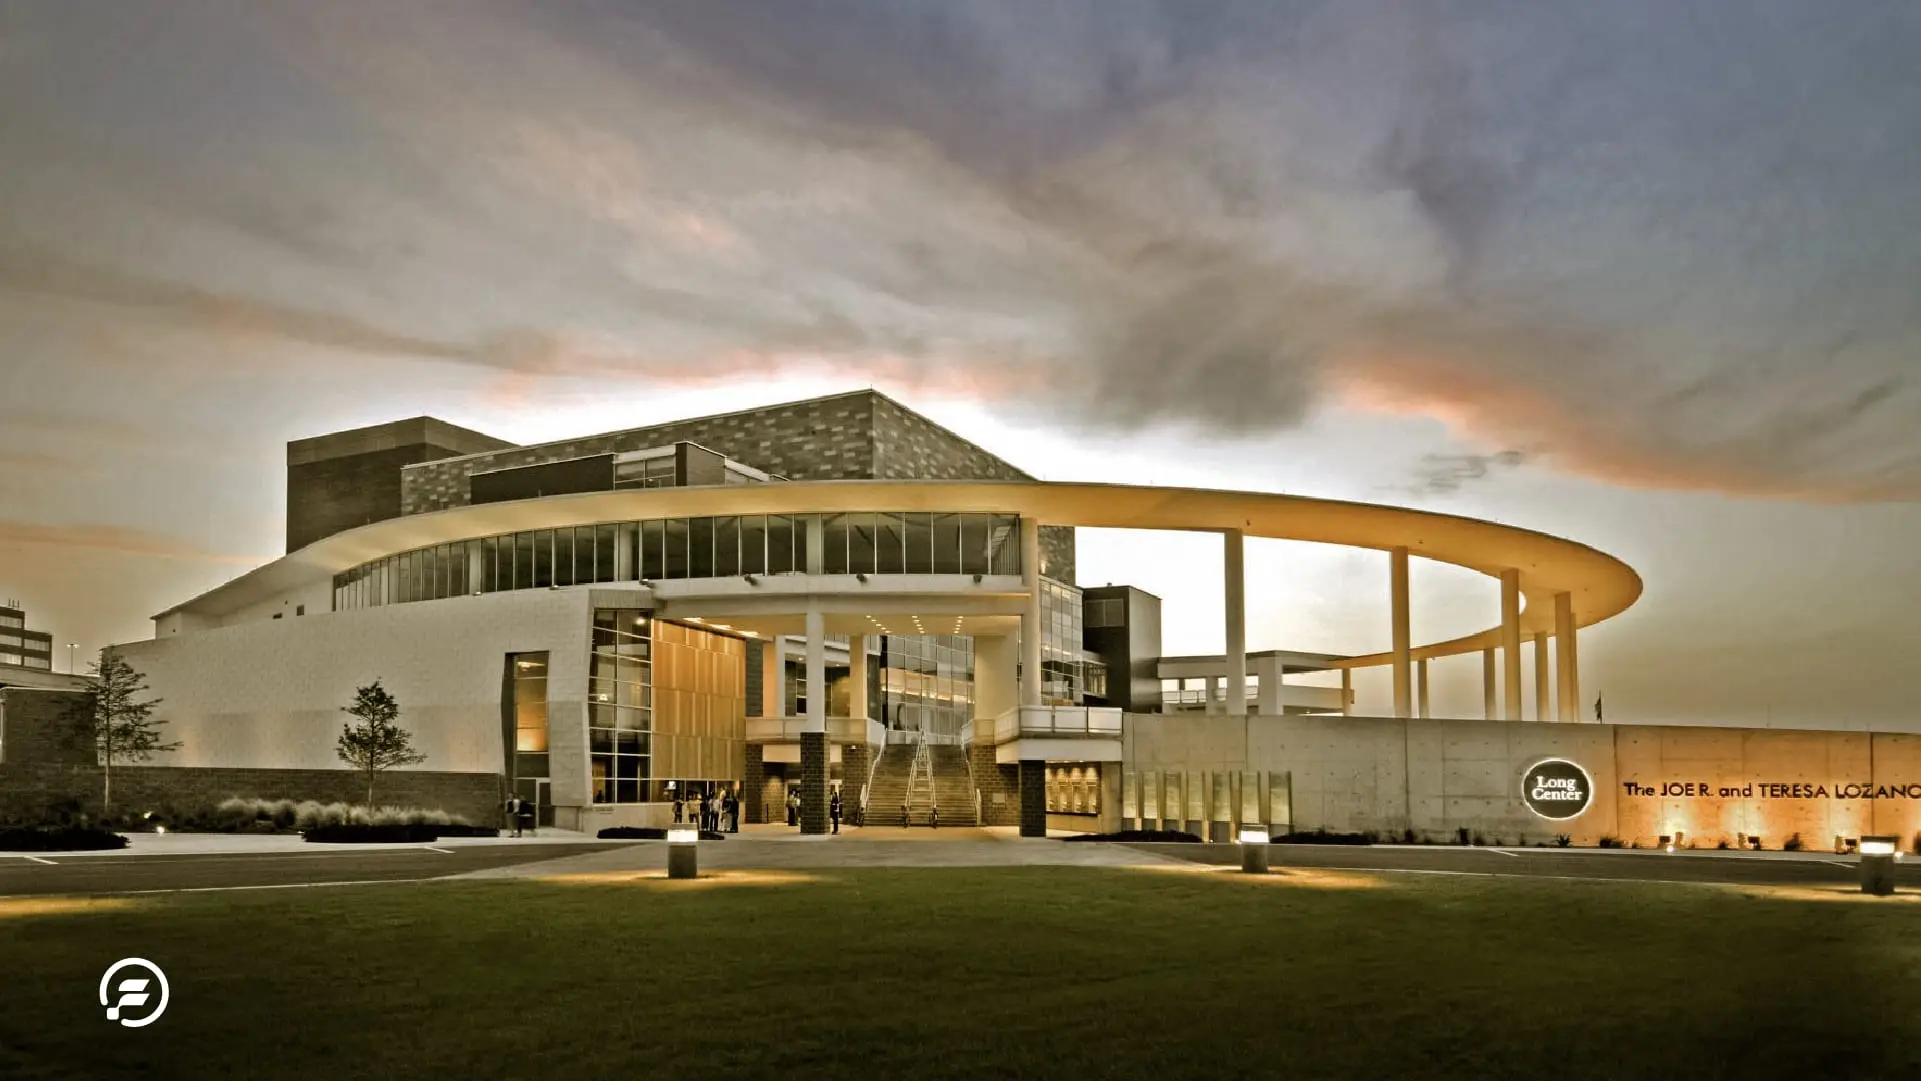 The Long Center in the evening time with a stormy cloud above it.